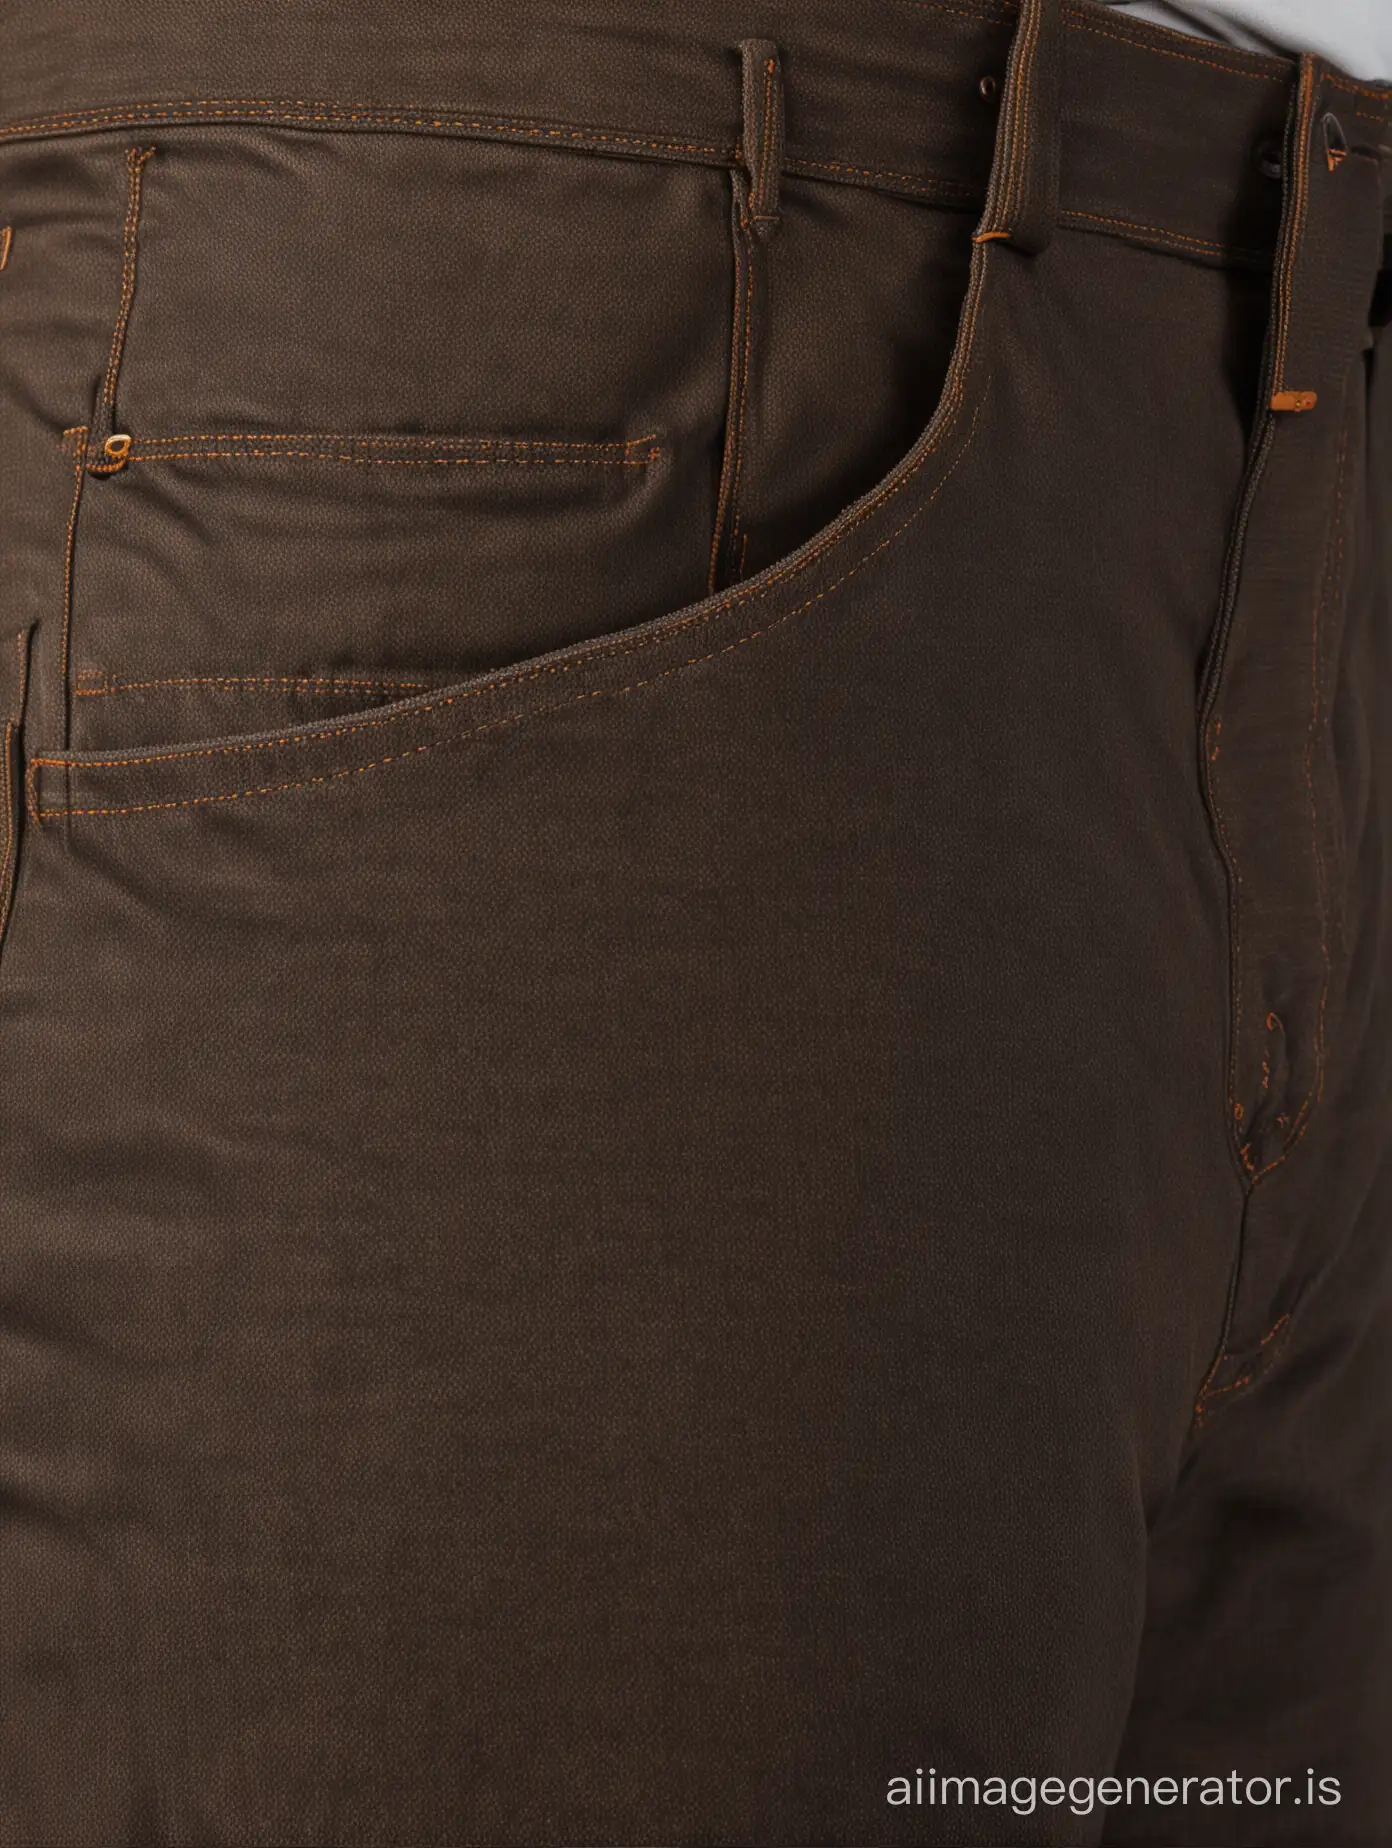 A sharp looking pair of Dark & Light Brown jeans with an enzyme wash having extra utility pocket on the right hand side, focus on trouser look and fabric textures with Dutch angle view.